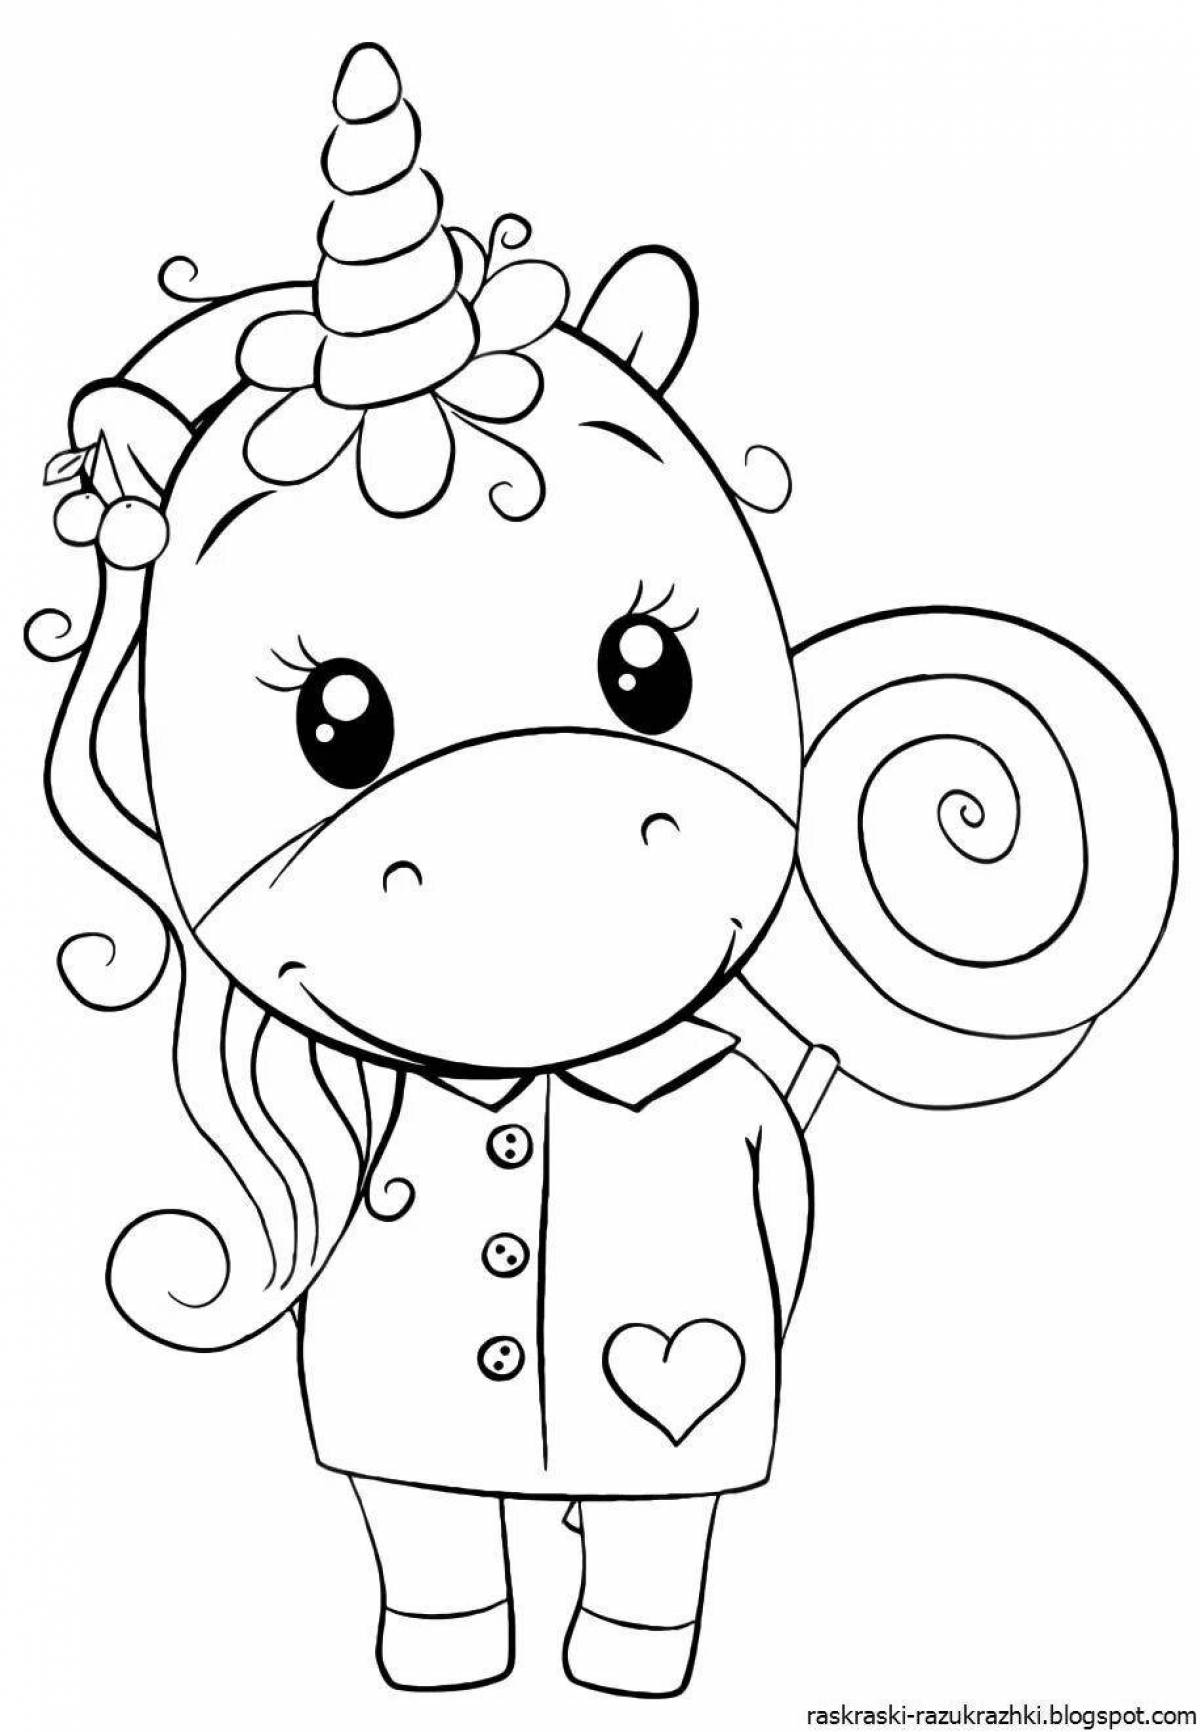 Violent coloring for girls cute unicorns